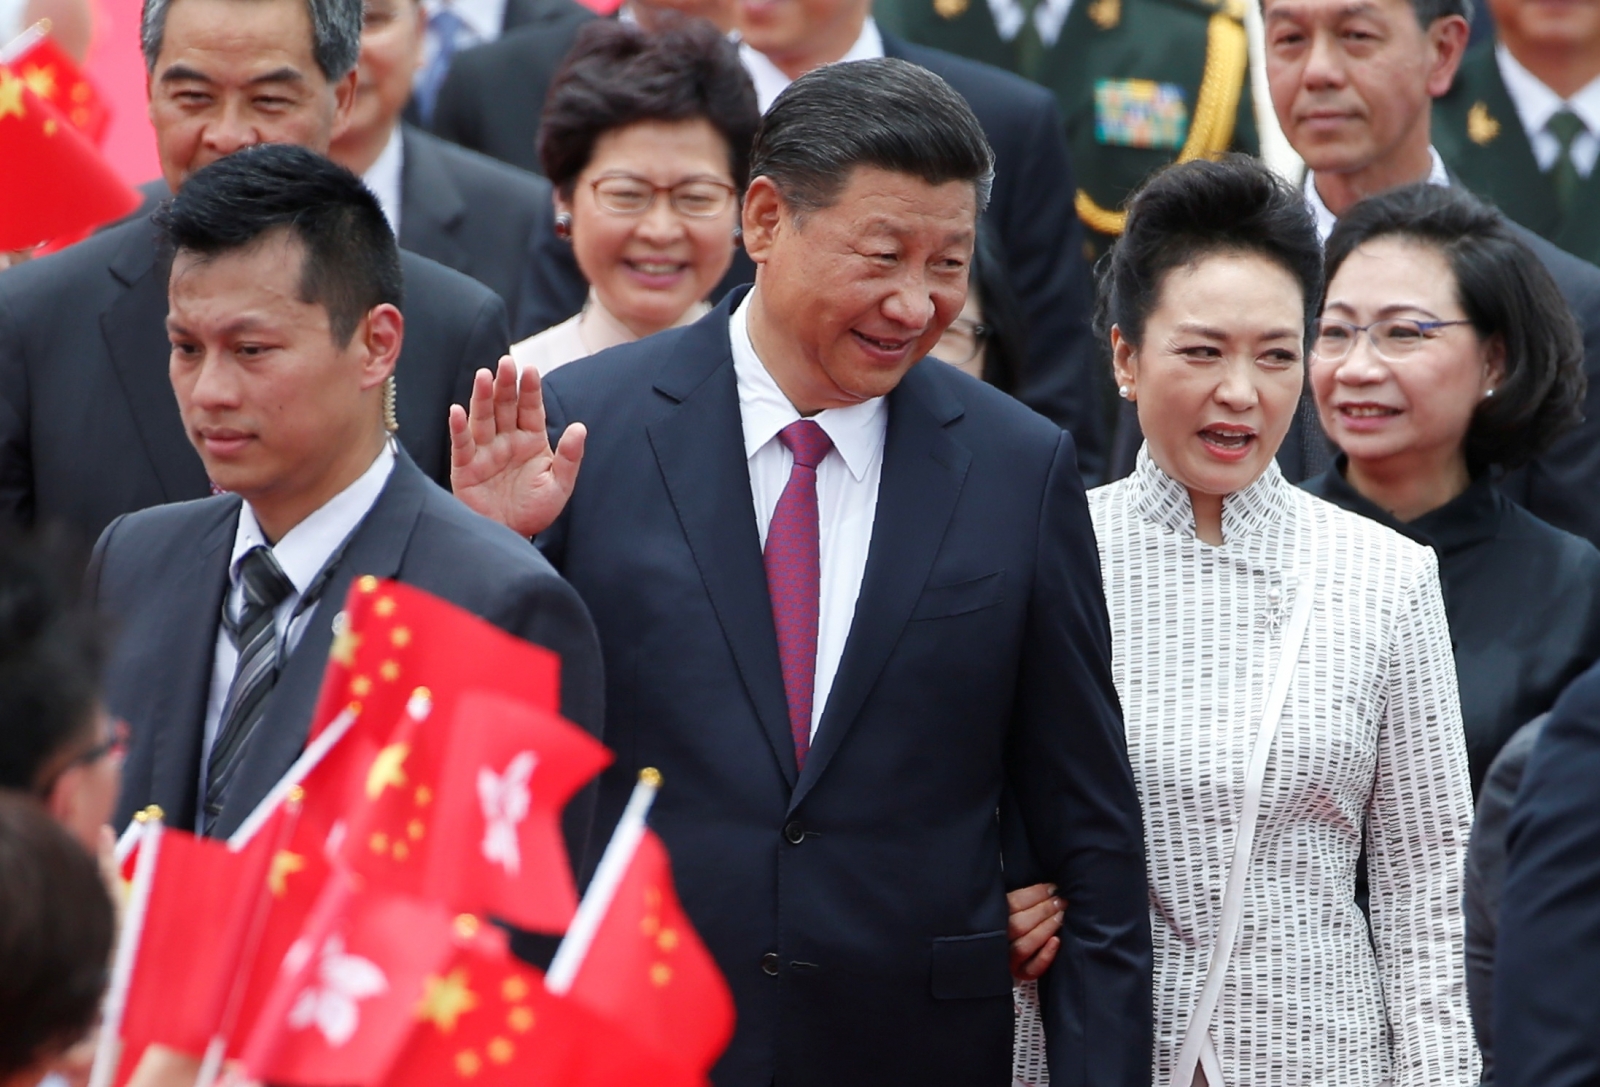 Xi Jinping lands in Hong Kong to cement China's grip on the city-state